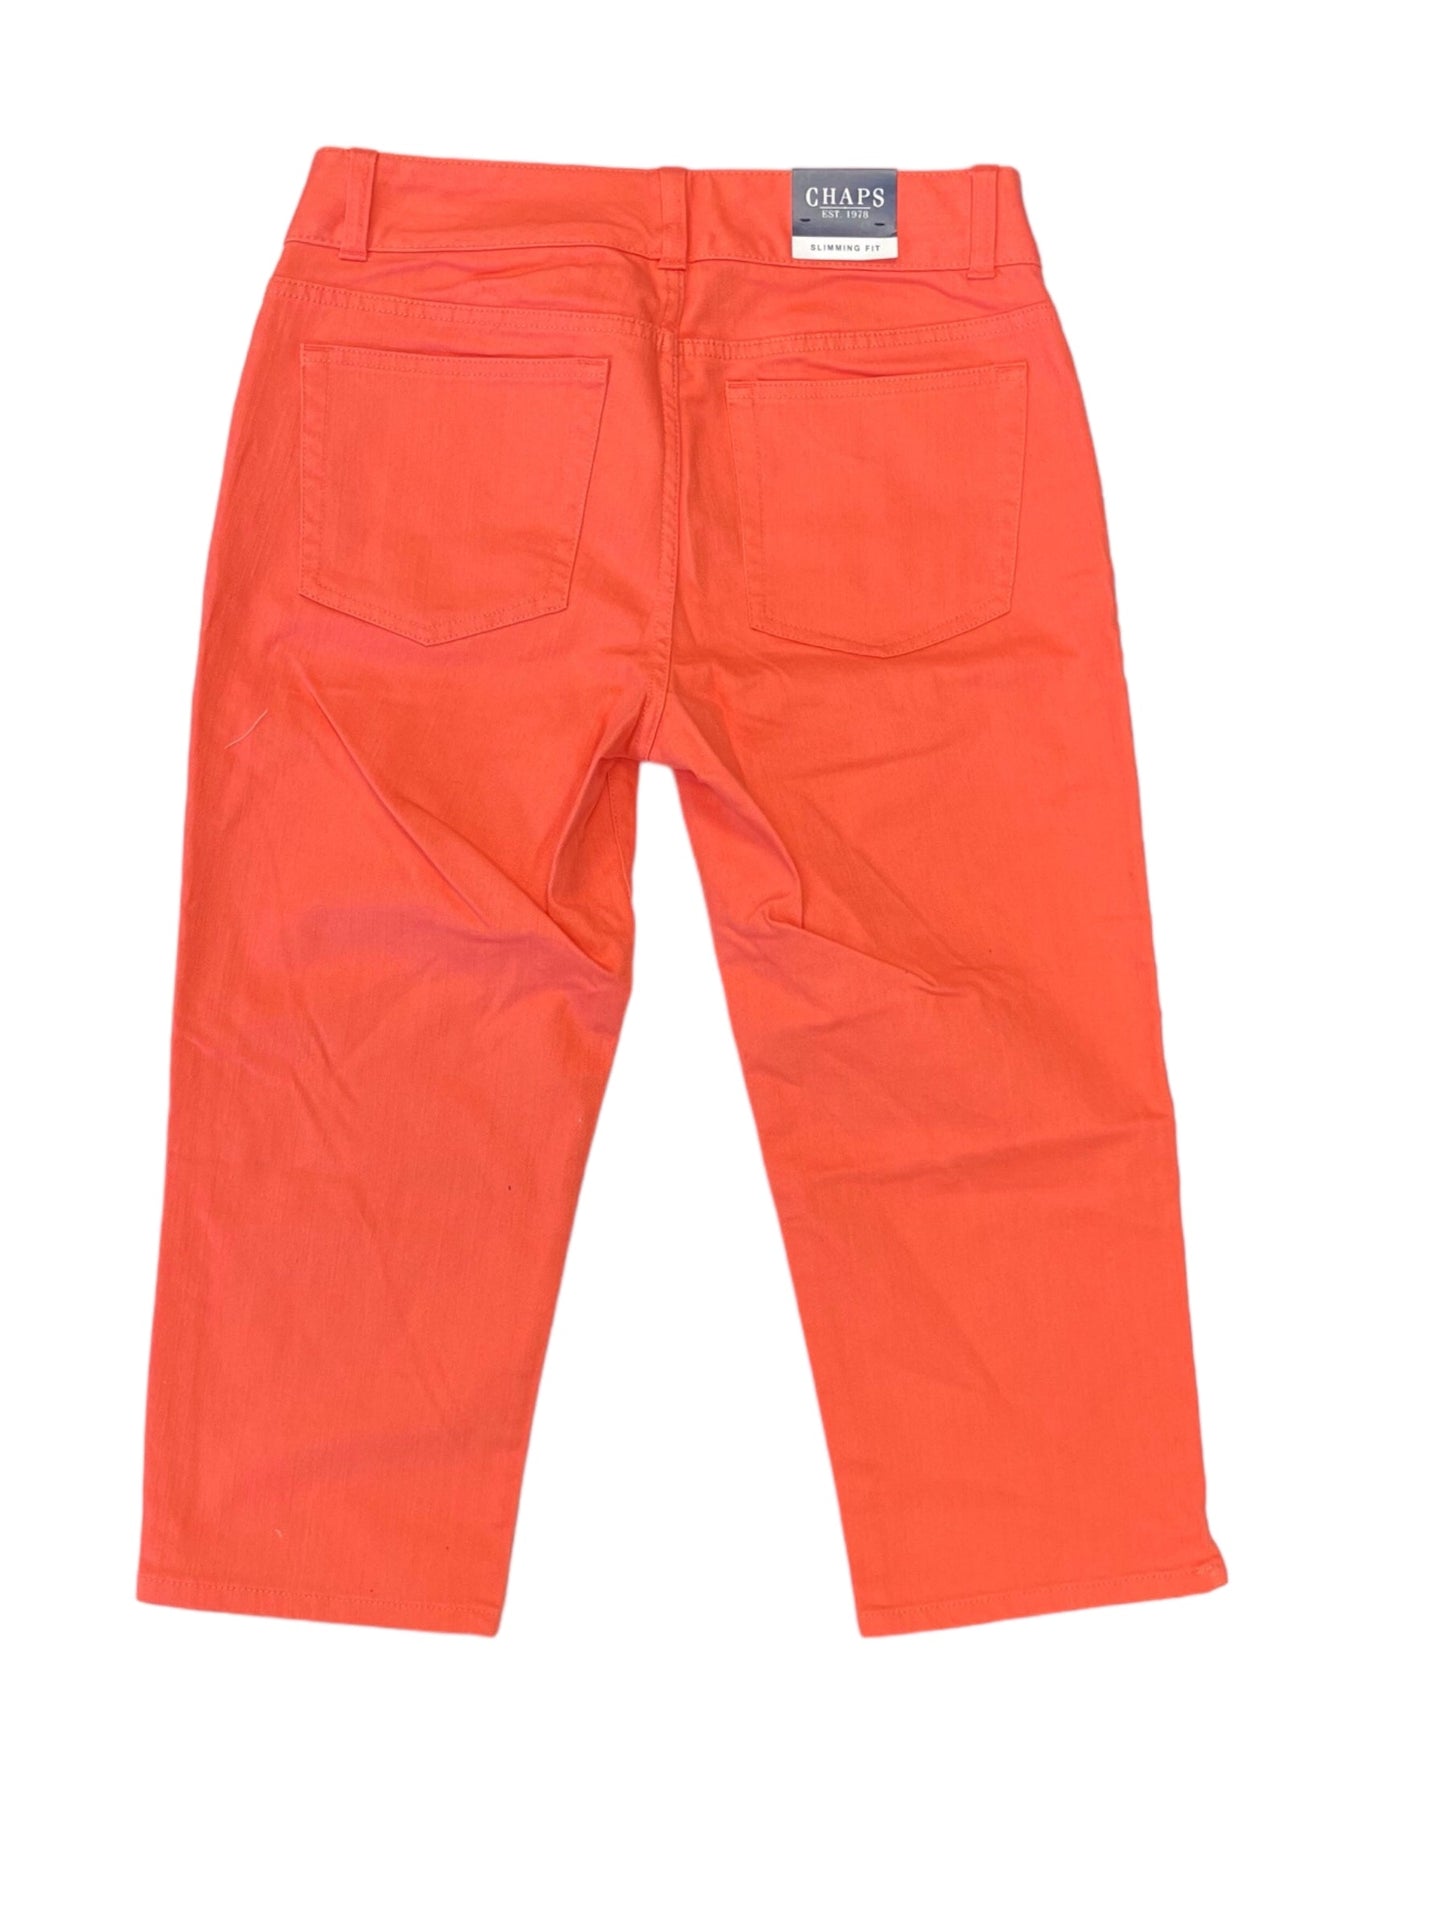 Pants Cropped By Chaps  Size: 8